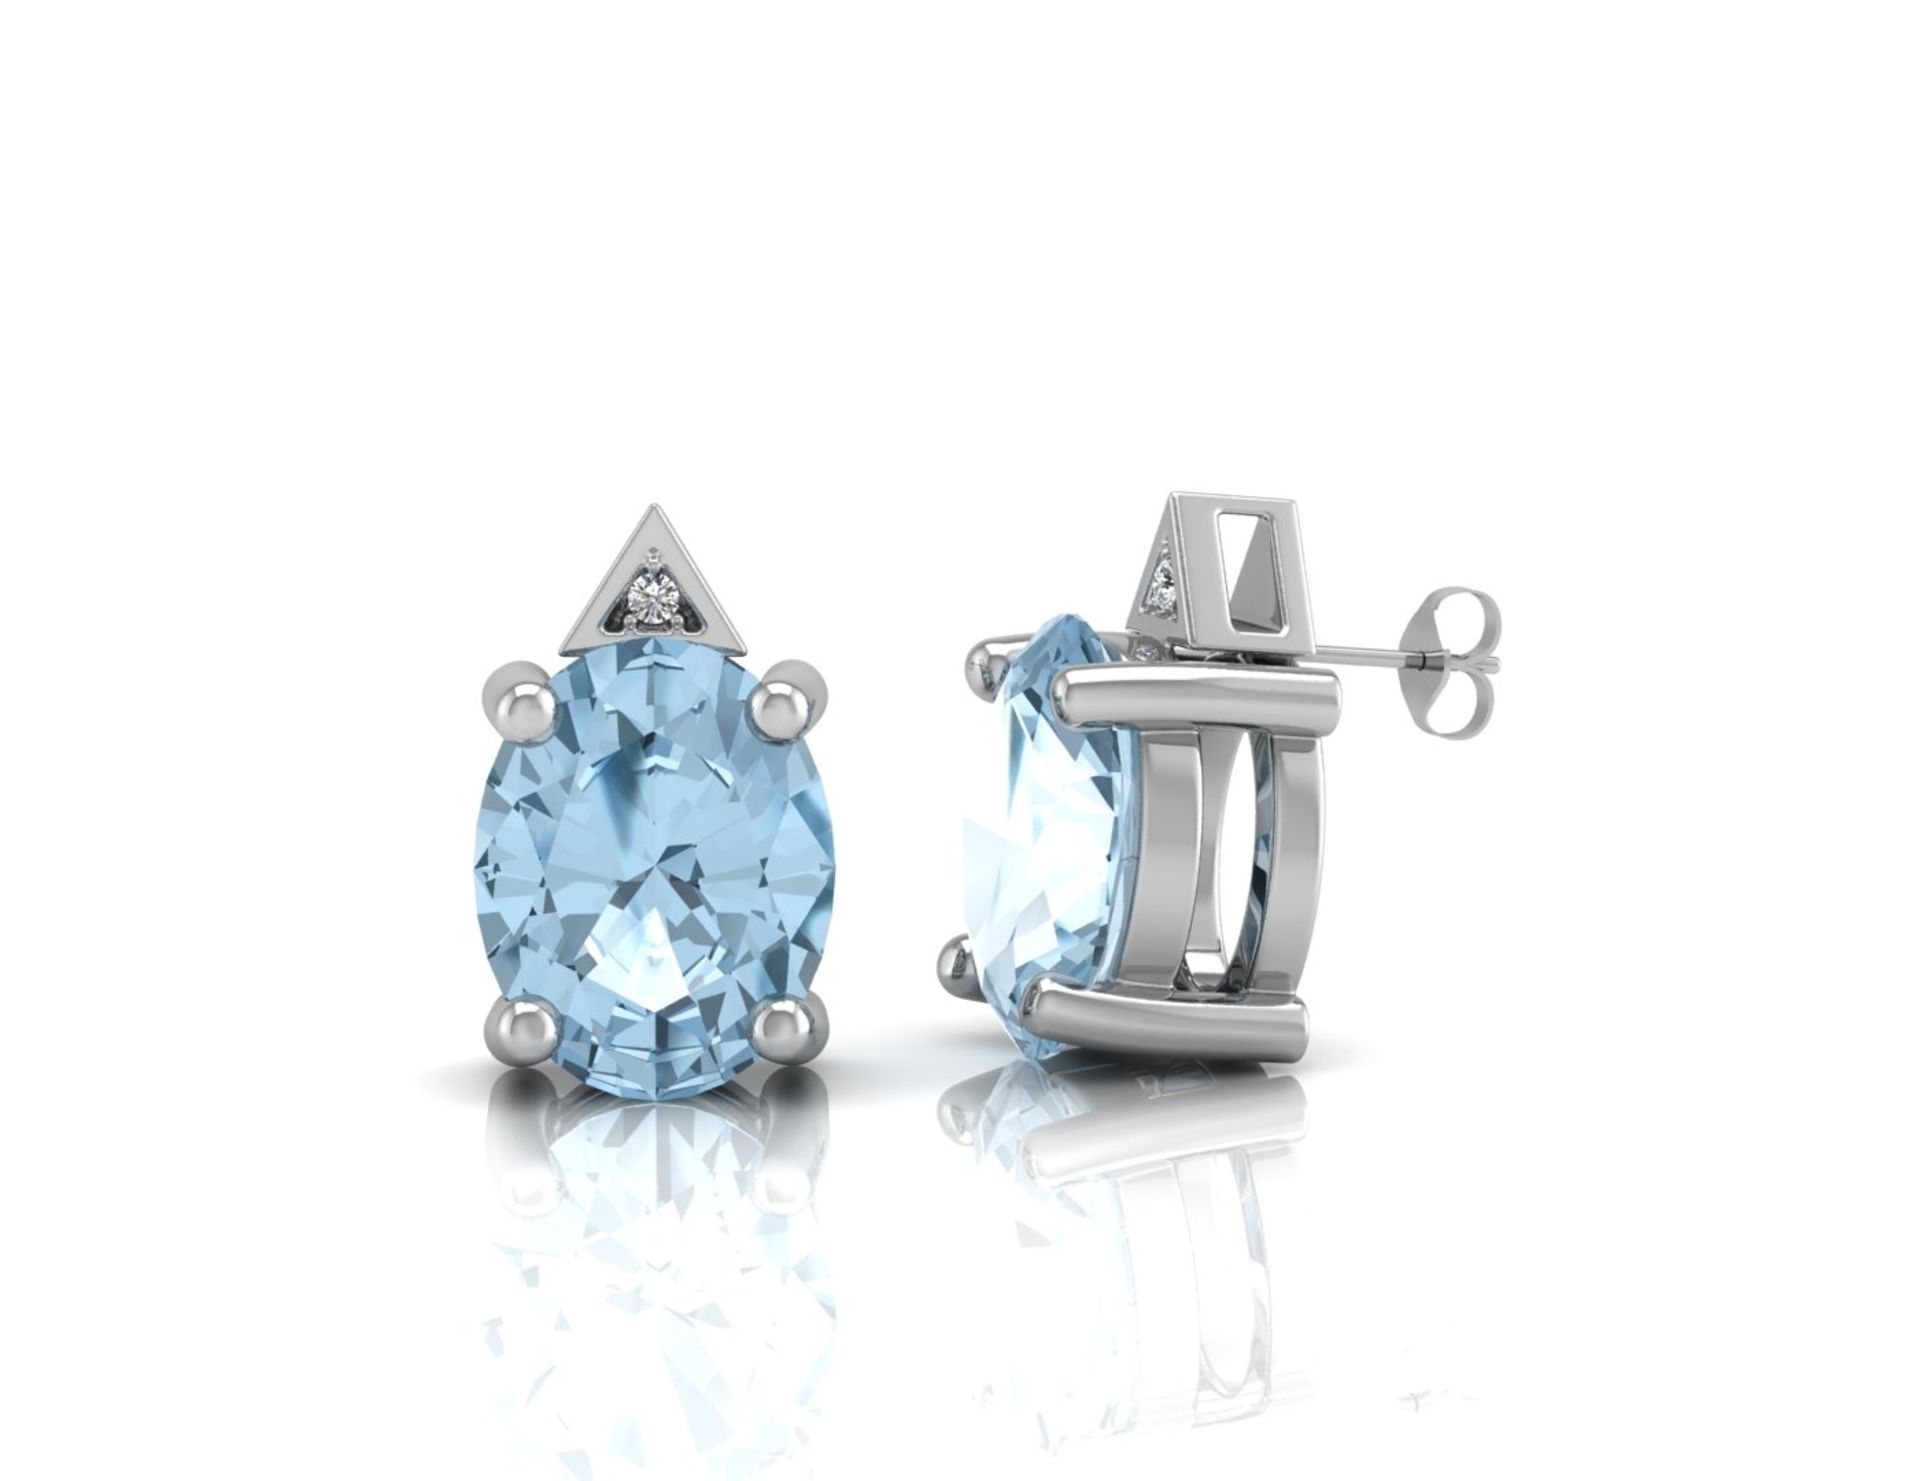 9ct White Gold Diamond And Blue Topaz Earrings - Valued By GIE £1,310.00 - A beautiful oval shaped